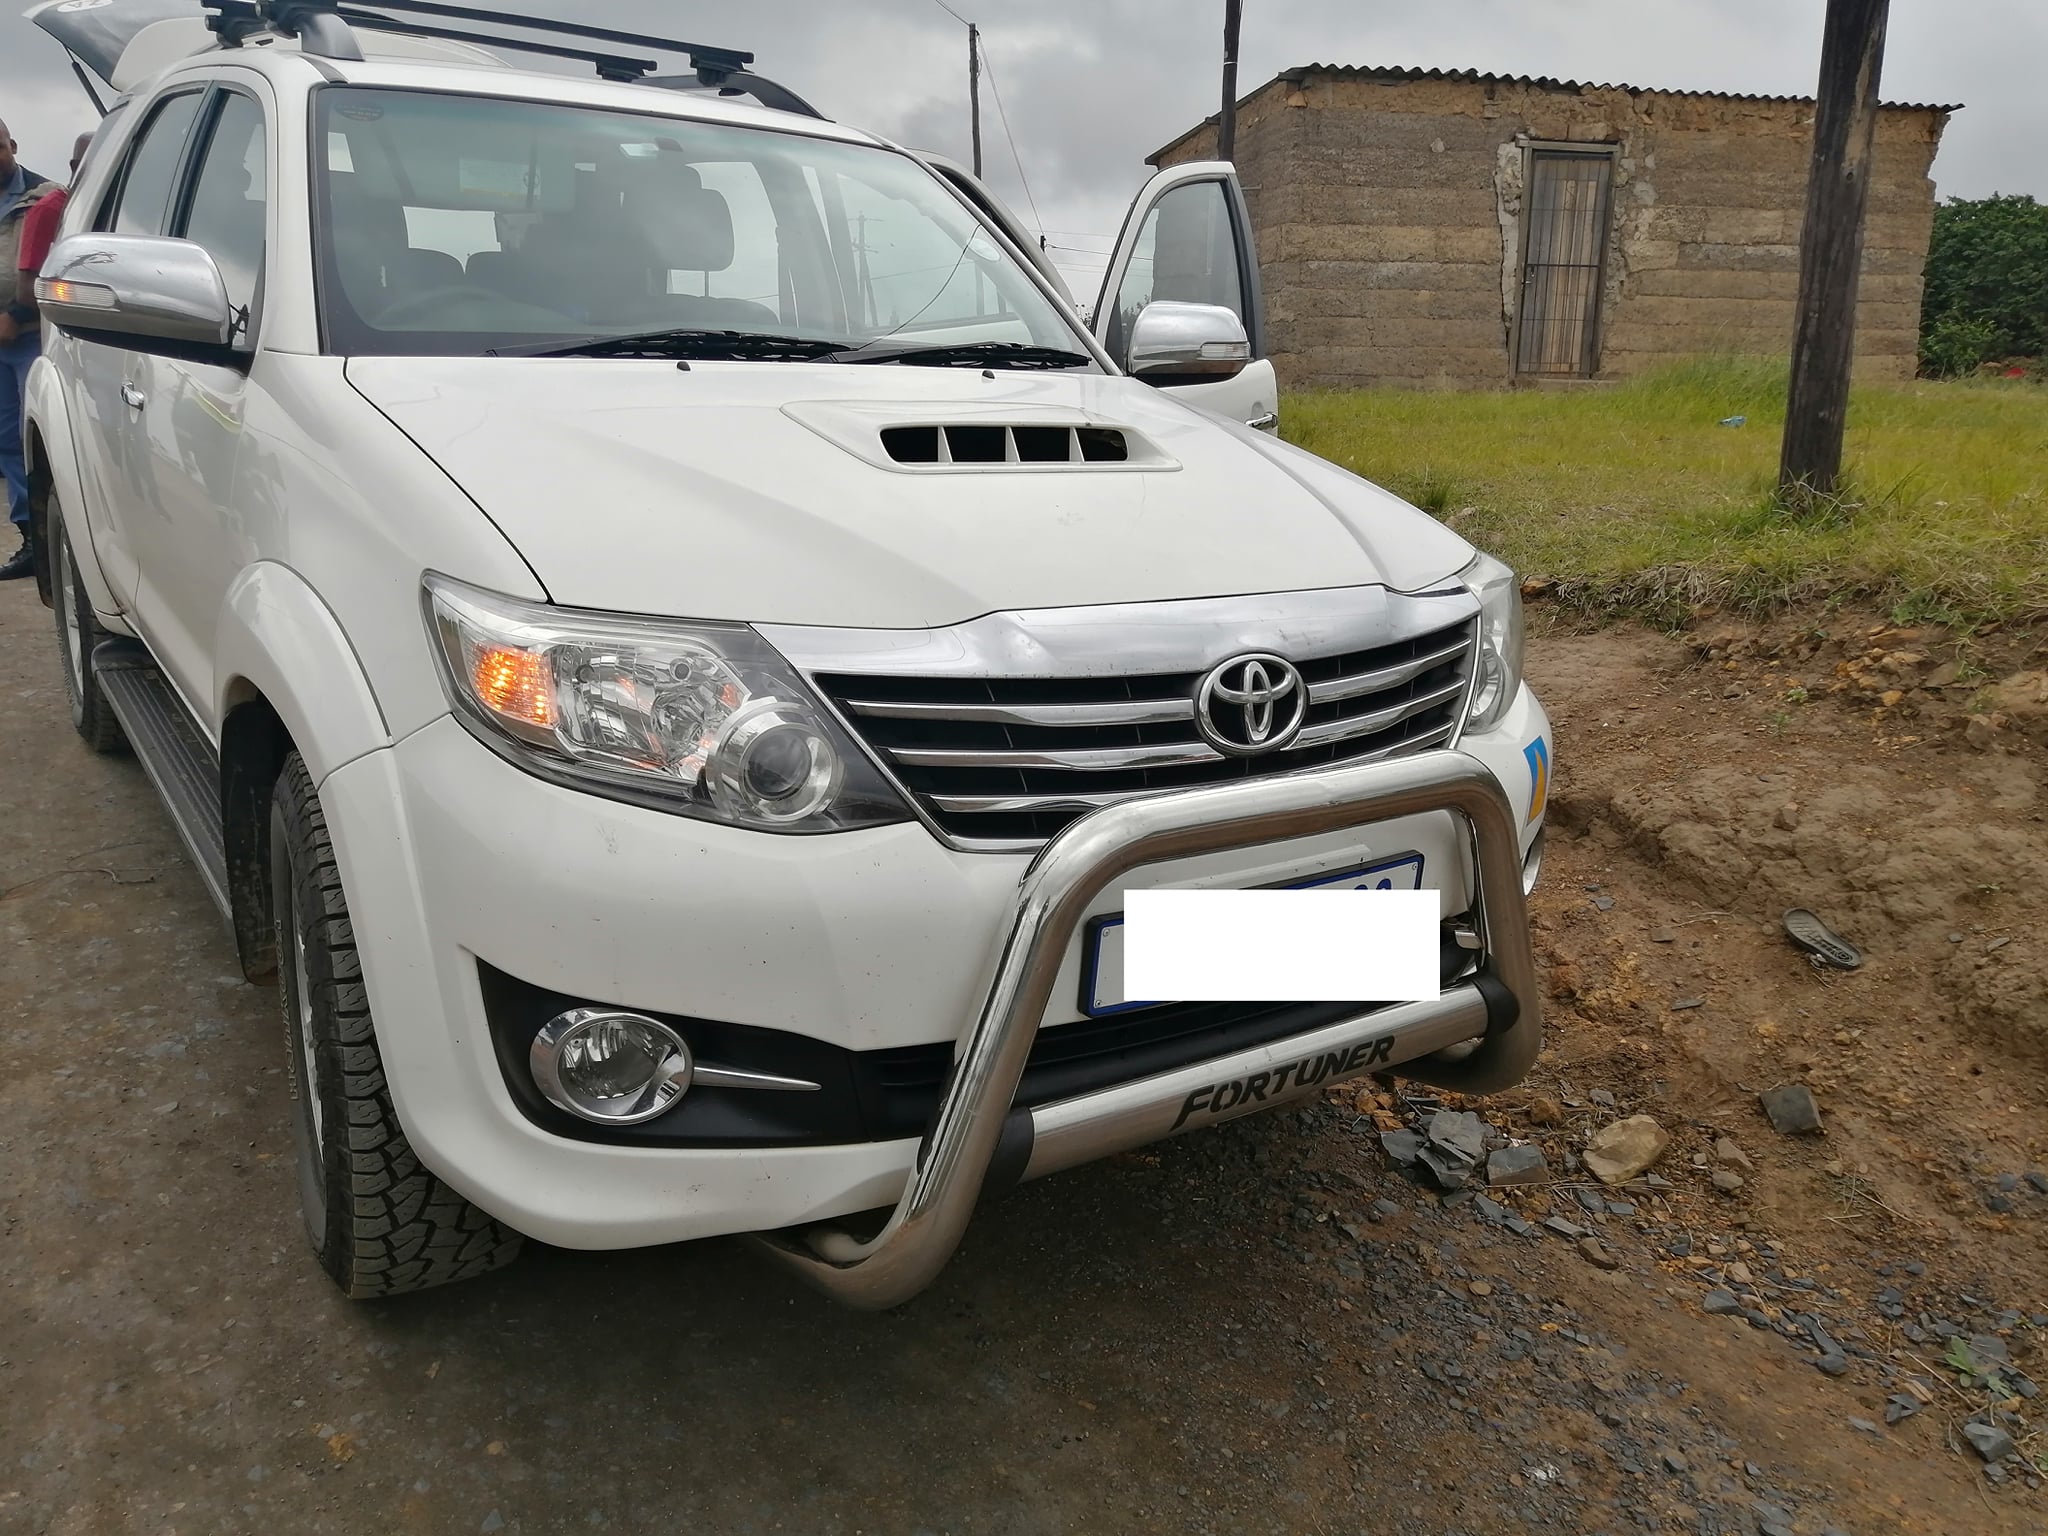 Stolen Fortuner recovered in Ensimbini - Folweni